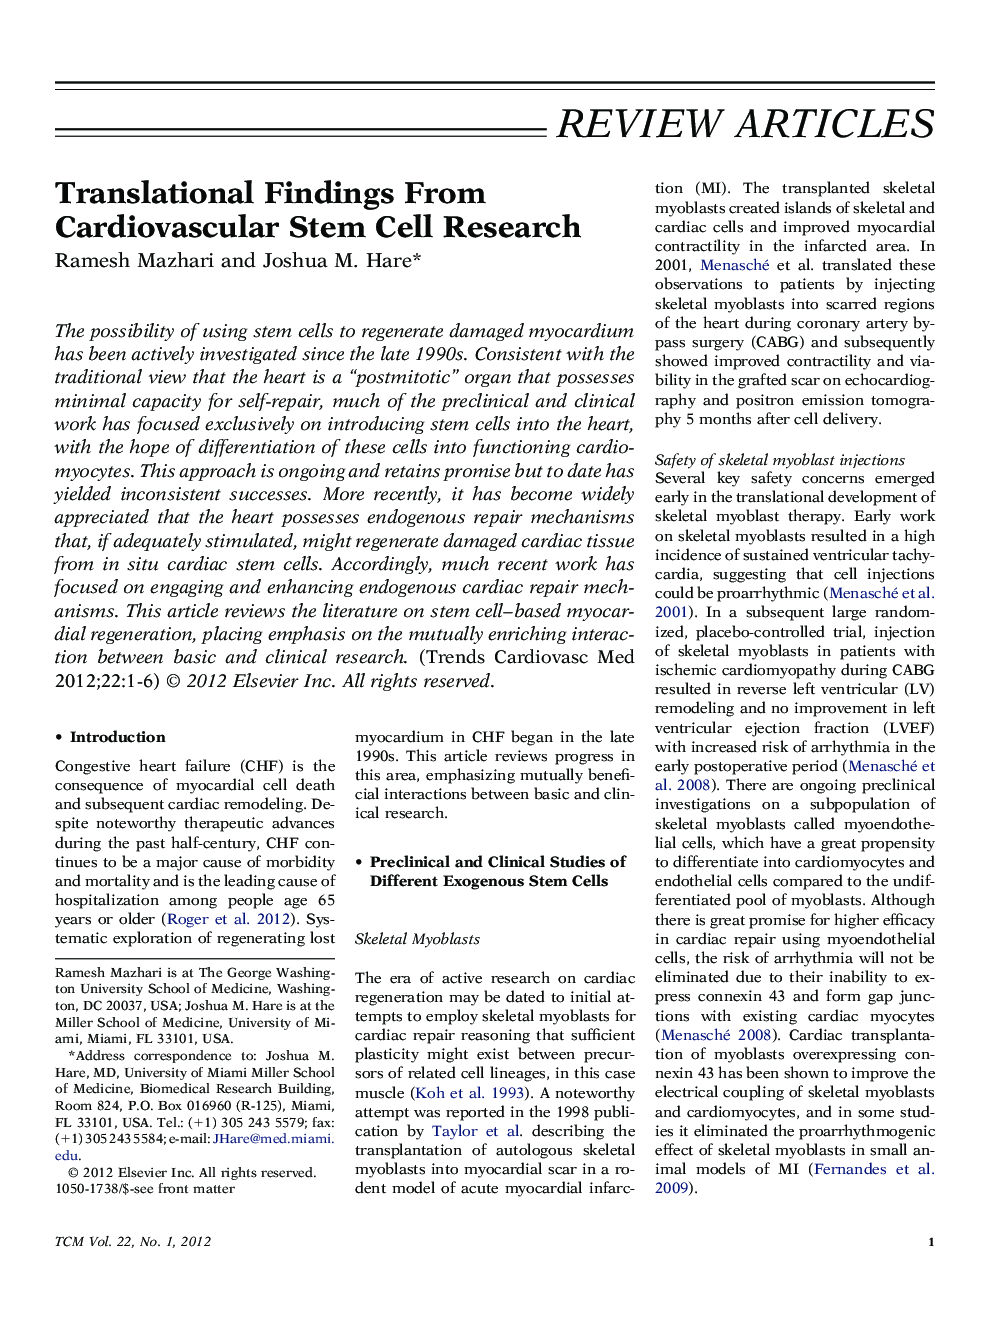 Translational Findings From Cardiovascular Stem Cell Research